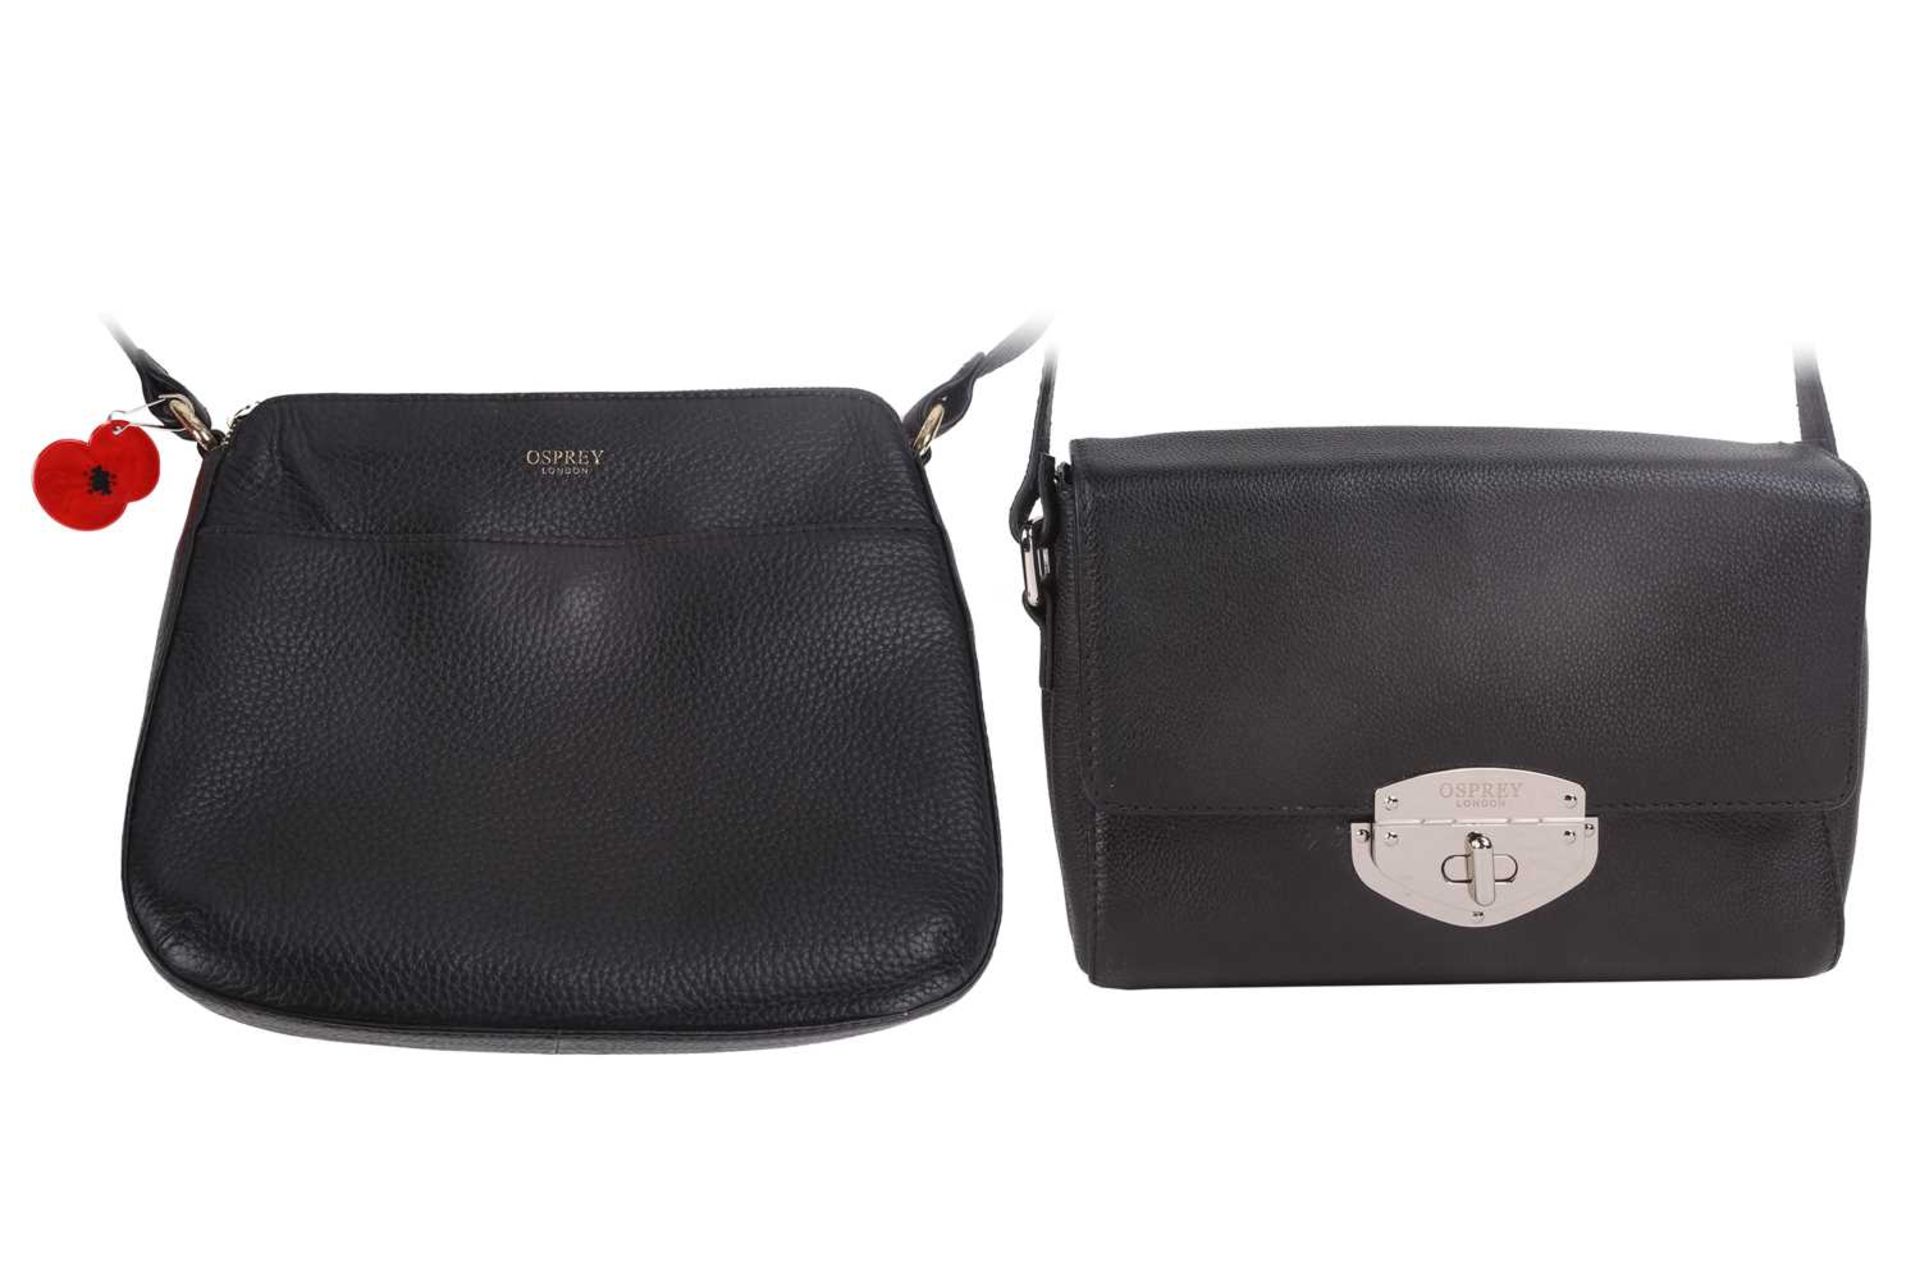 Two Osprey crossbody bags in black leather; one with top zip closure, adjustable crossbody strap, - Image 2 of 12